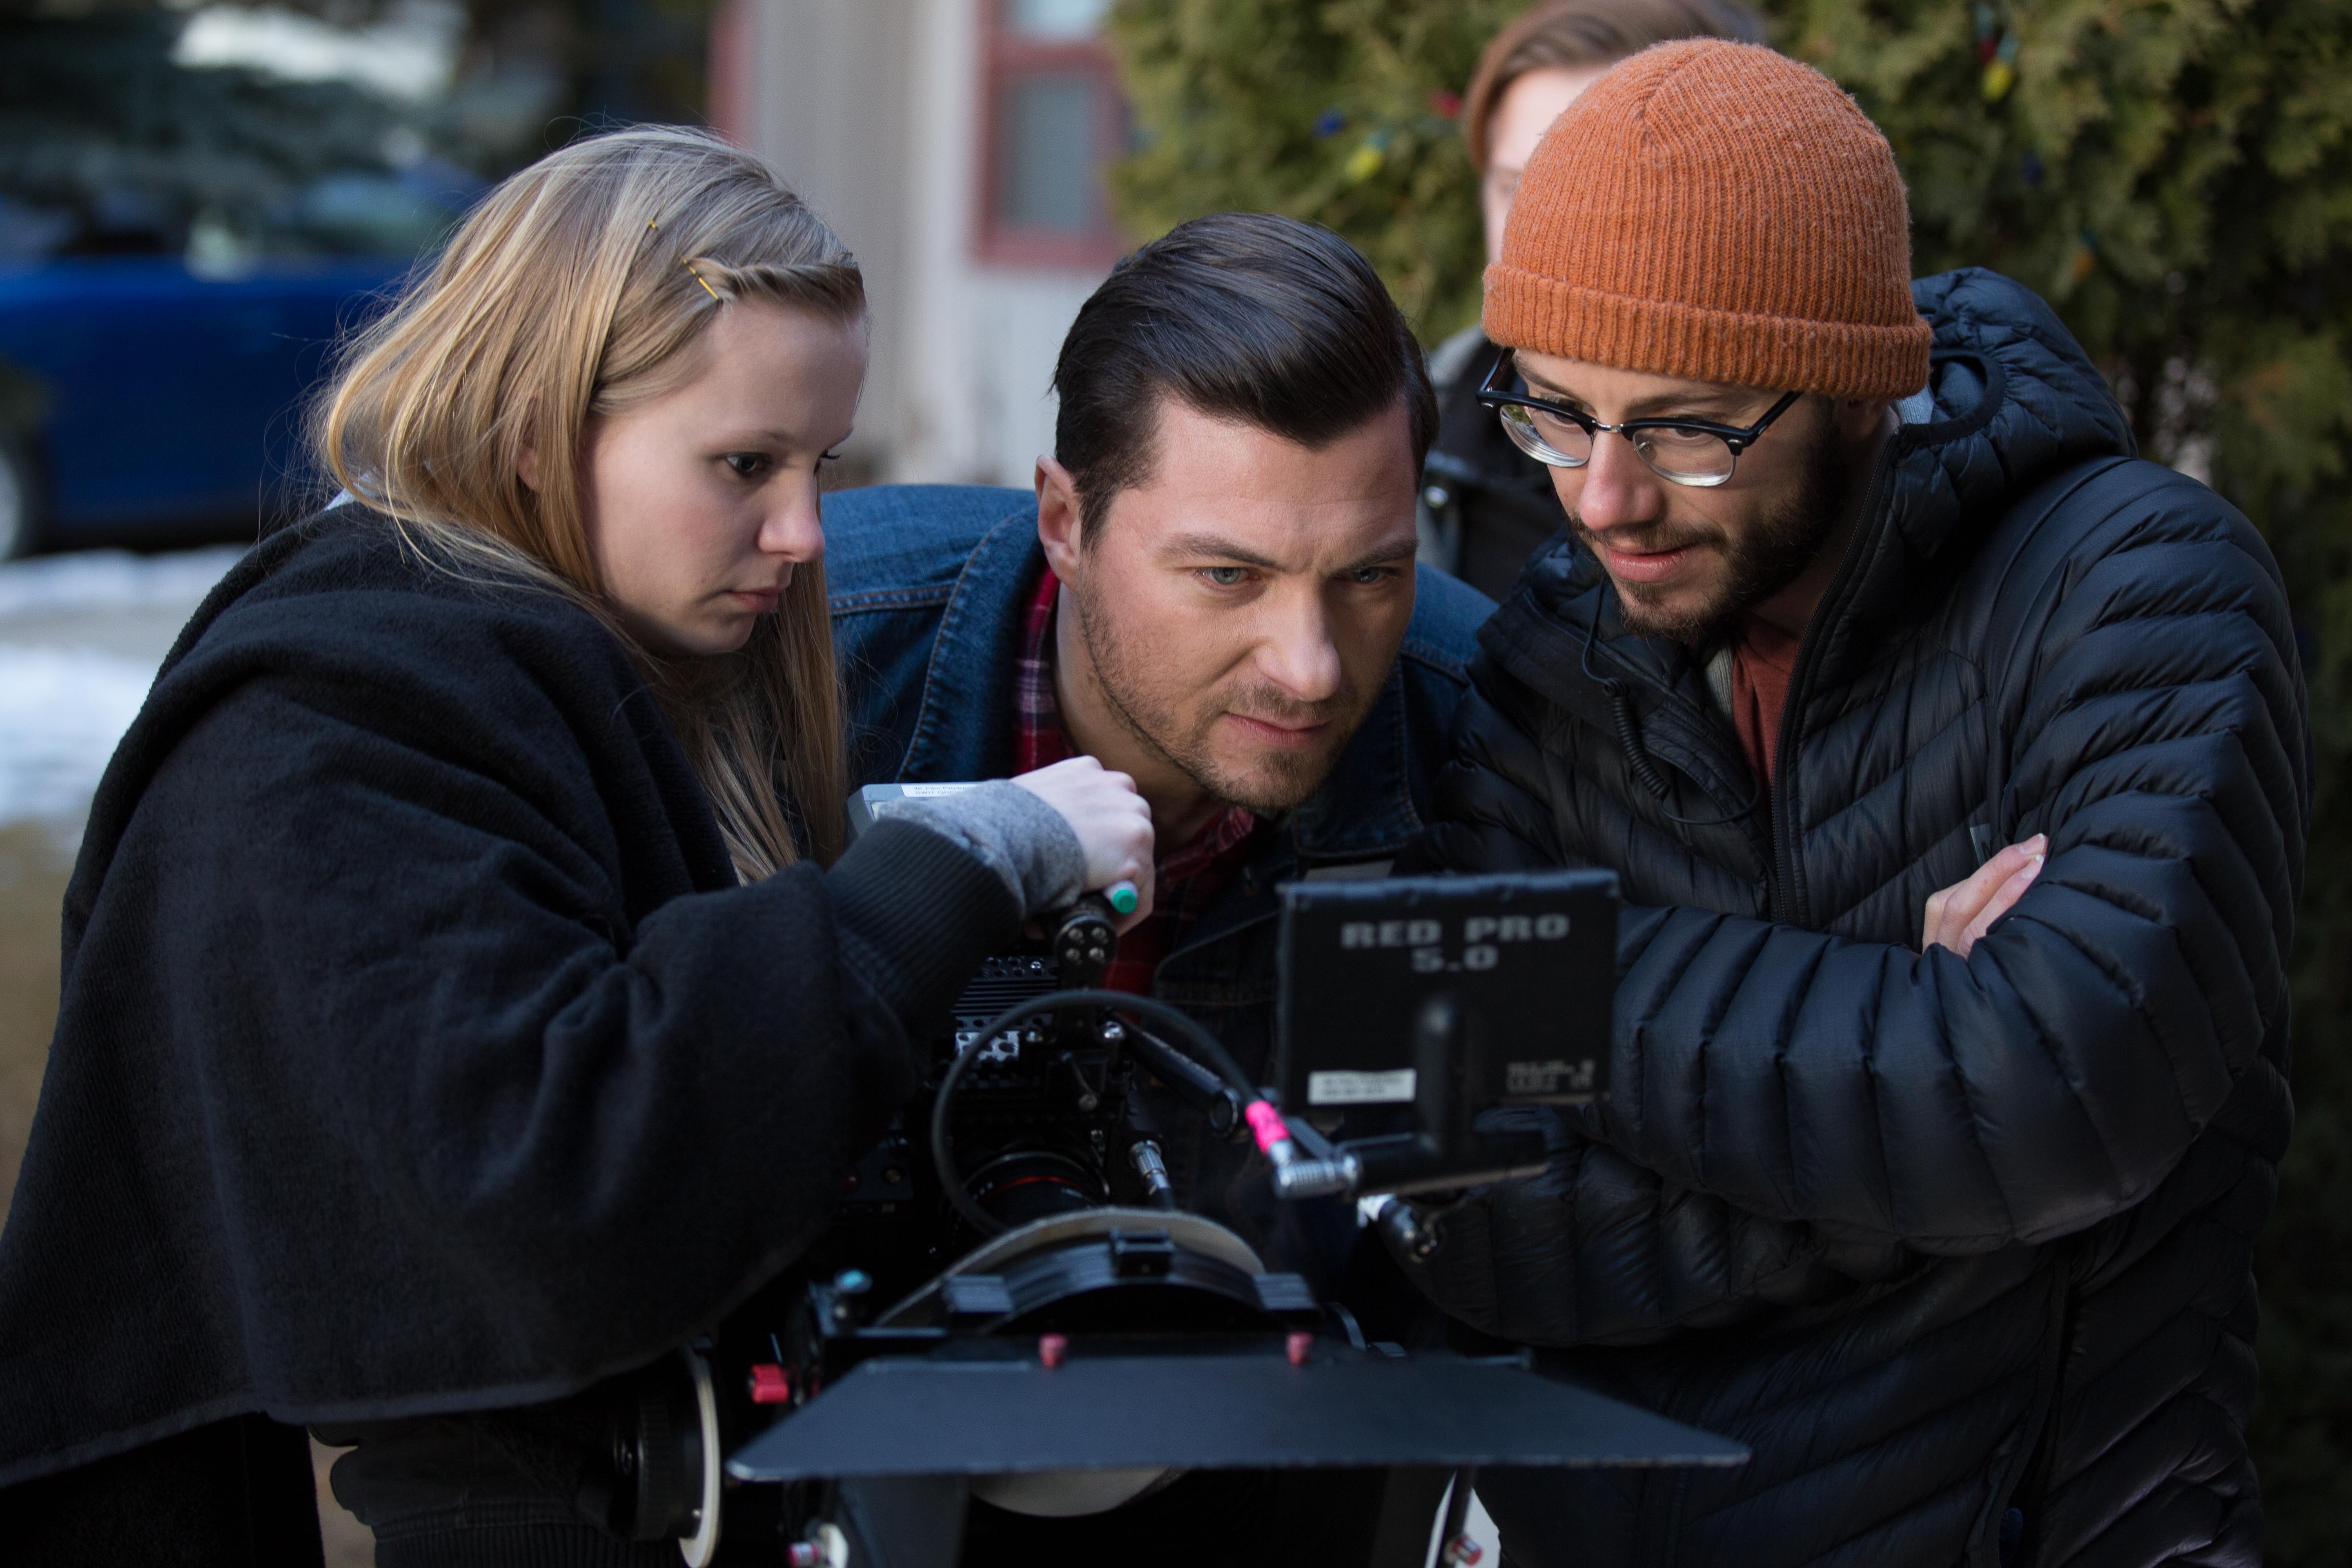 Chelsea Carrick, Todd Kipp and Aaron Bernakevitch on location during filming for 